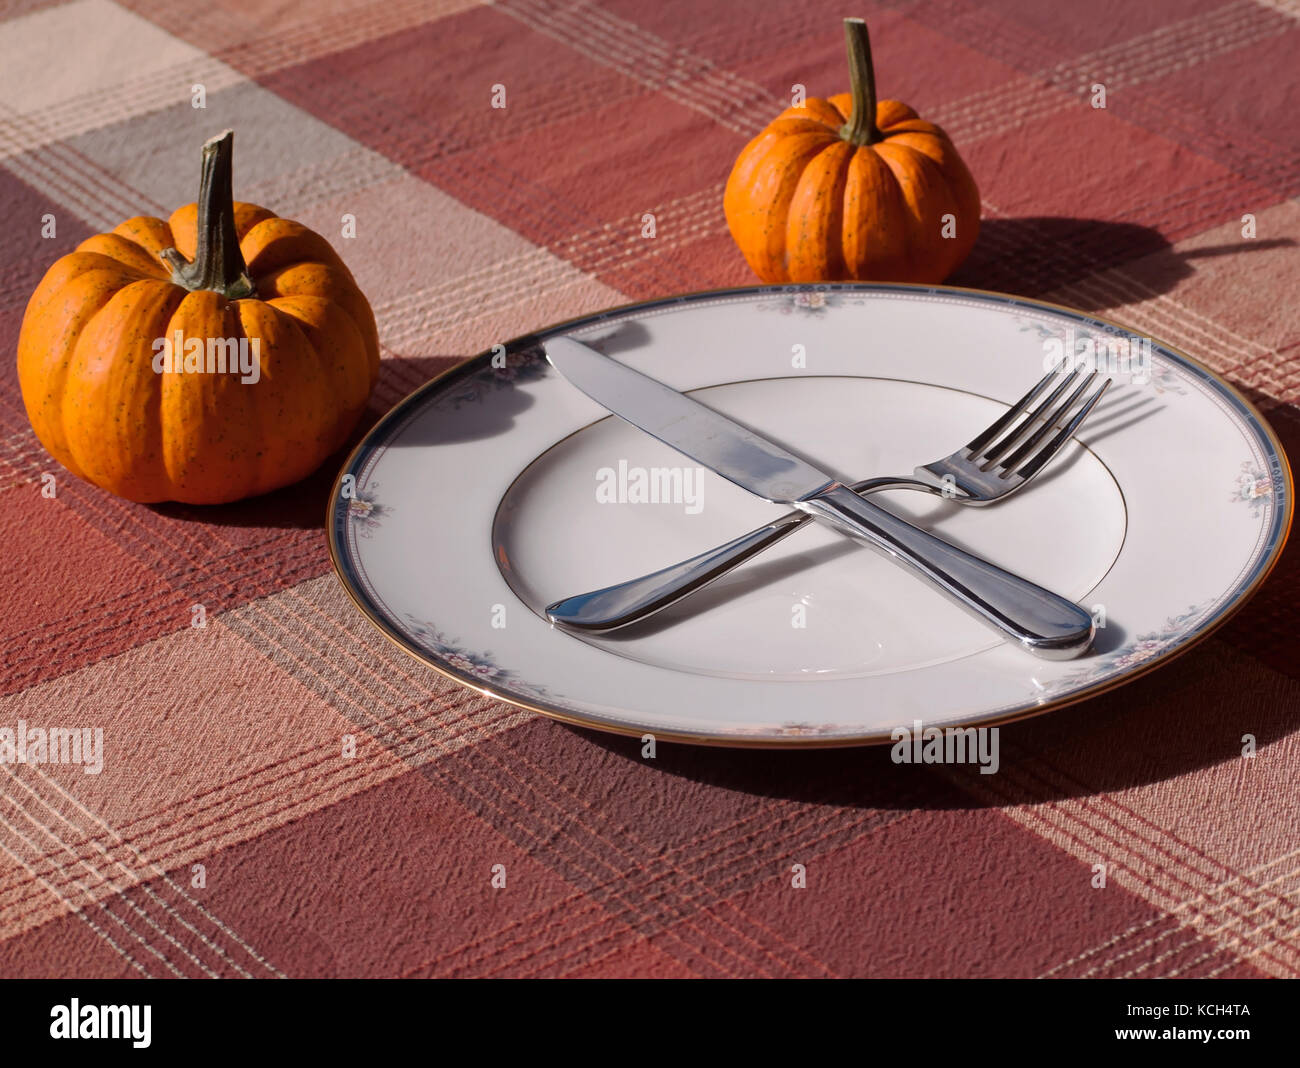 A fall place setting in the sun with two pumpkins on a plaid table cloth Stock Photo